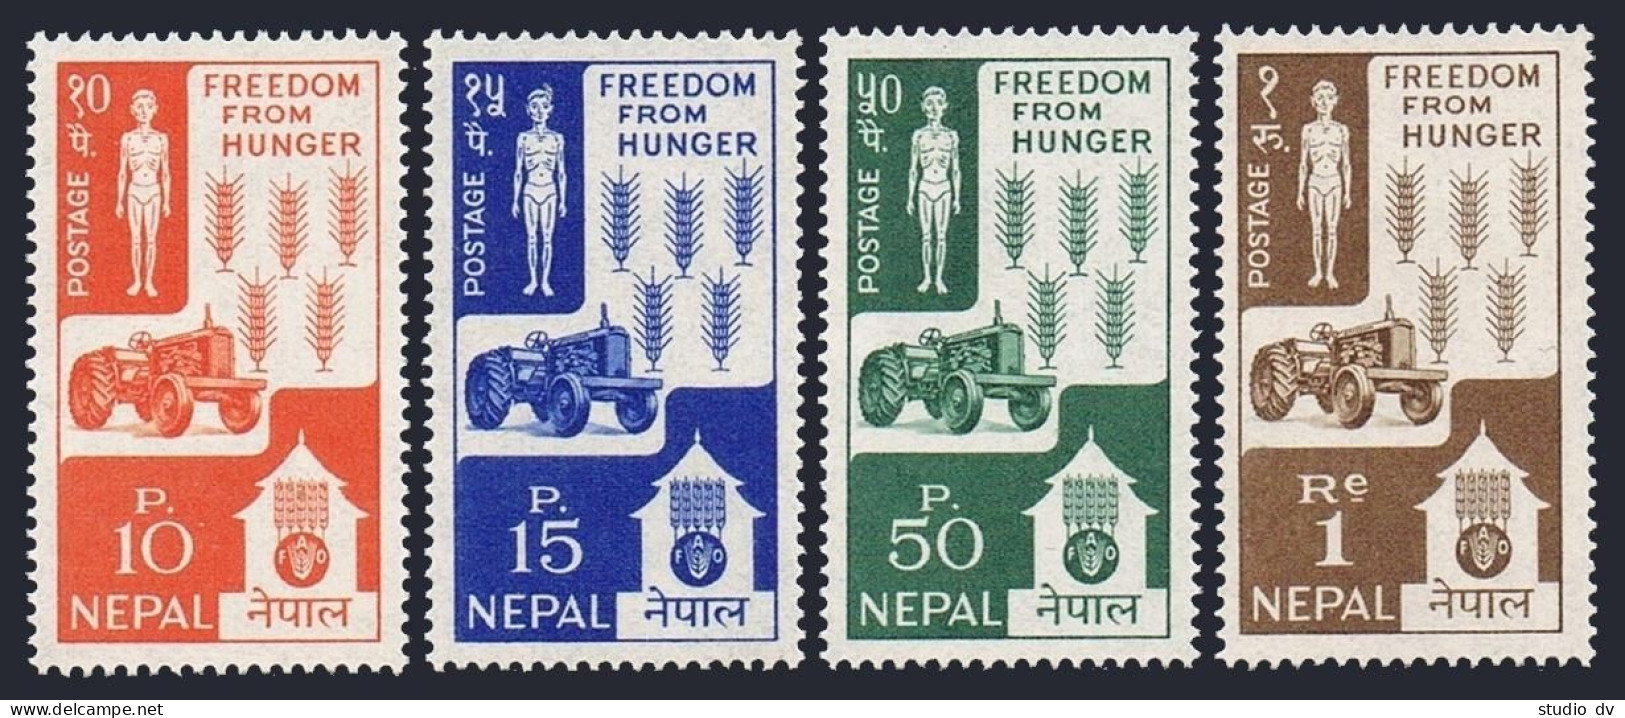 Nepal 159-162, MNH. Mi 168-171. FAO Freedom From Hunger Campaign 1963. Tractor, - Népal